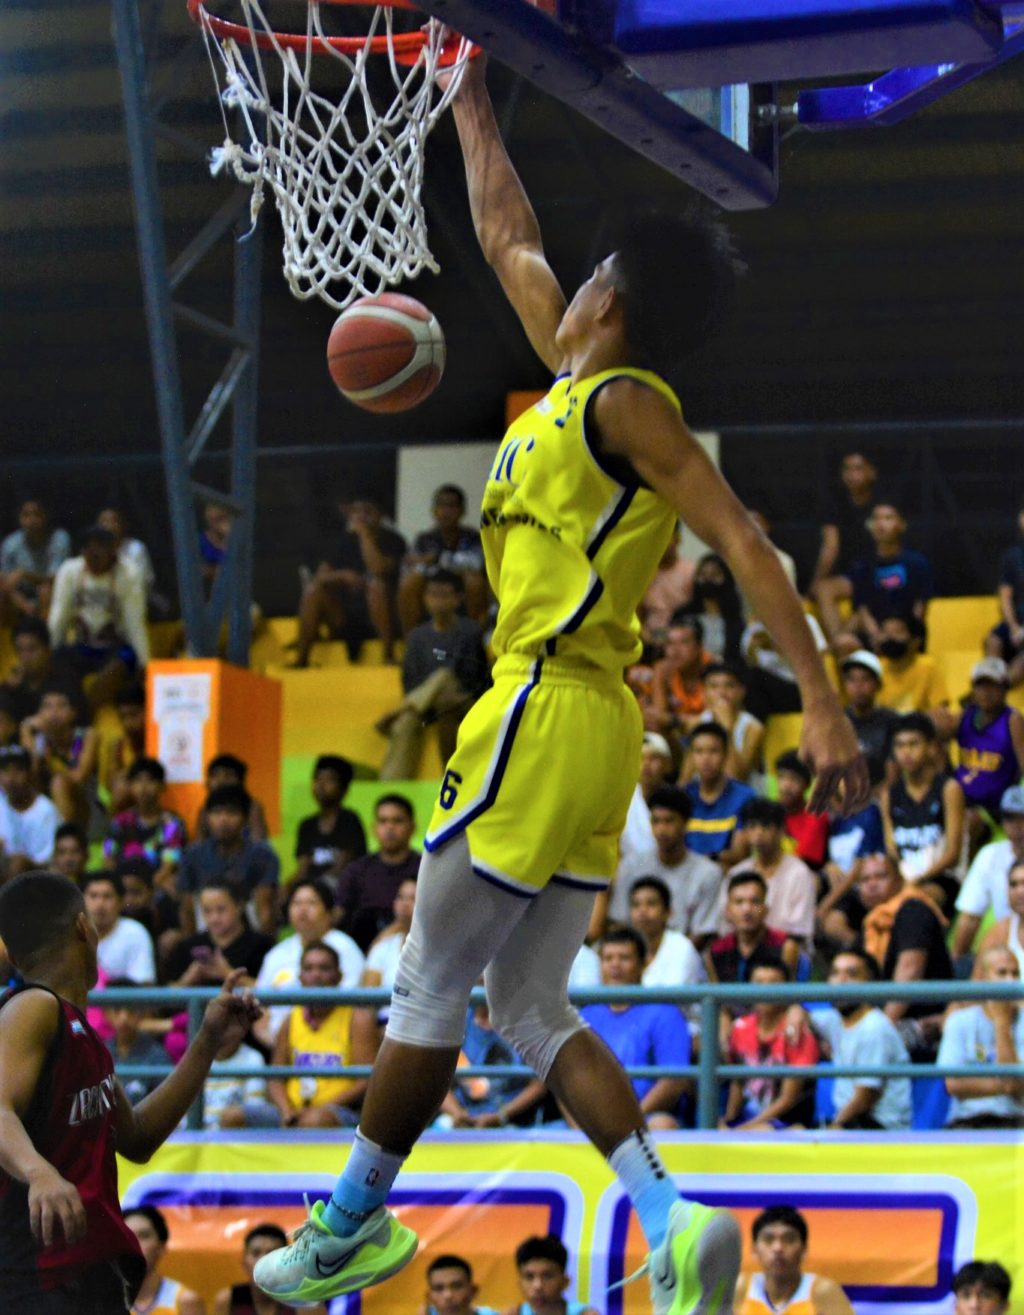 UC Baby Webmasters' Mark Solonia hangs on the rim after a dunk in their exhibition game against the OCCCI D-League North Leyte all stars on Saturday evening in Jaro, Leyte. | Photo from the OCCCI D-League Facebook page